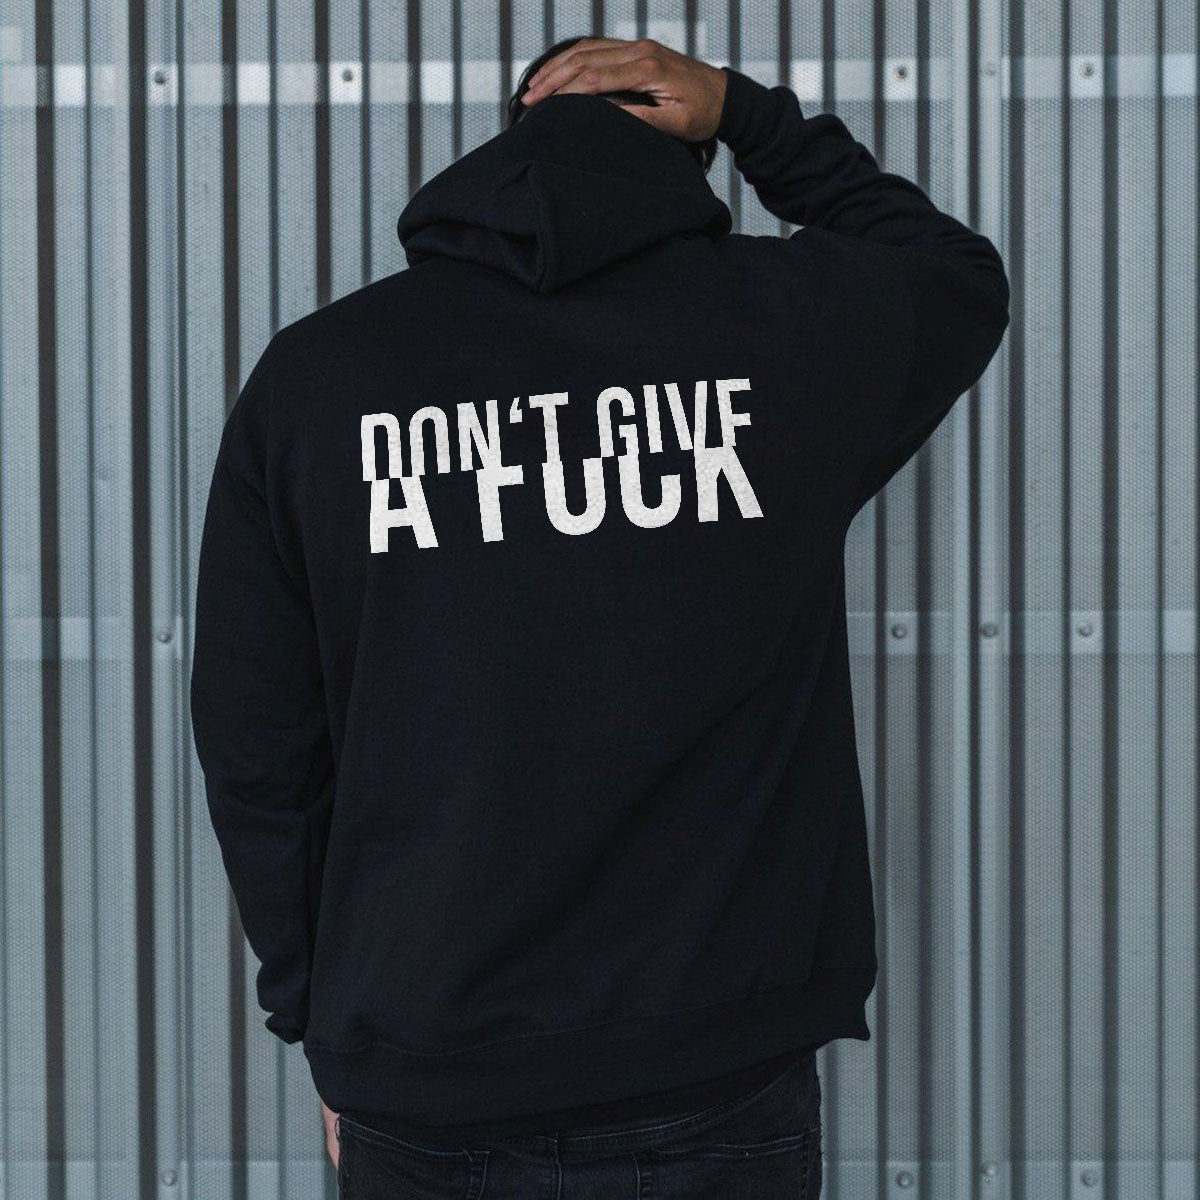 Don't Give A Fuck Printed Men's All-match Hoodie FitBeastWear